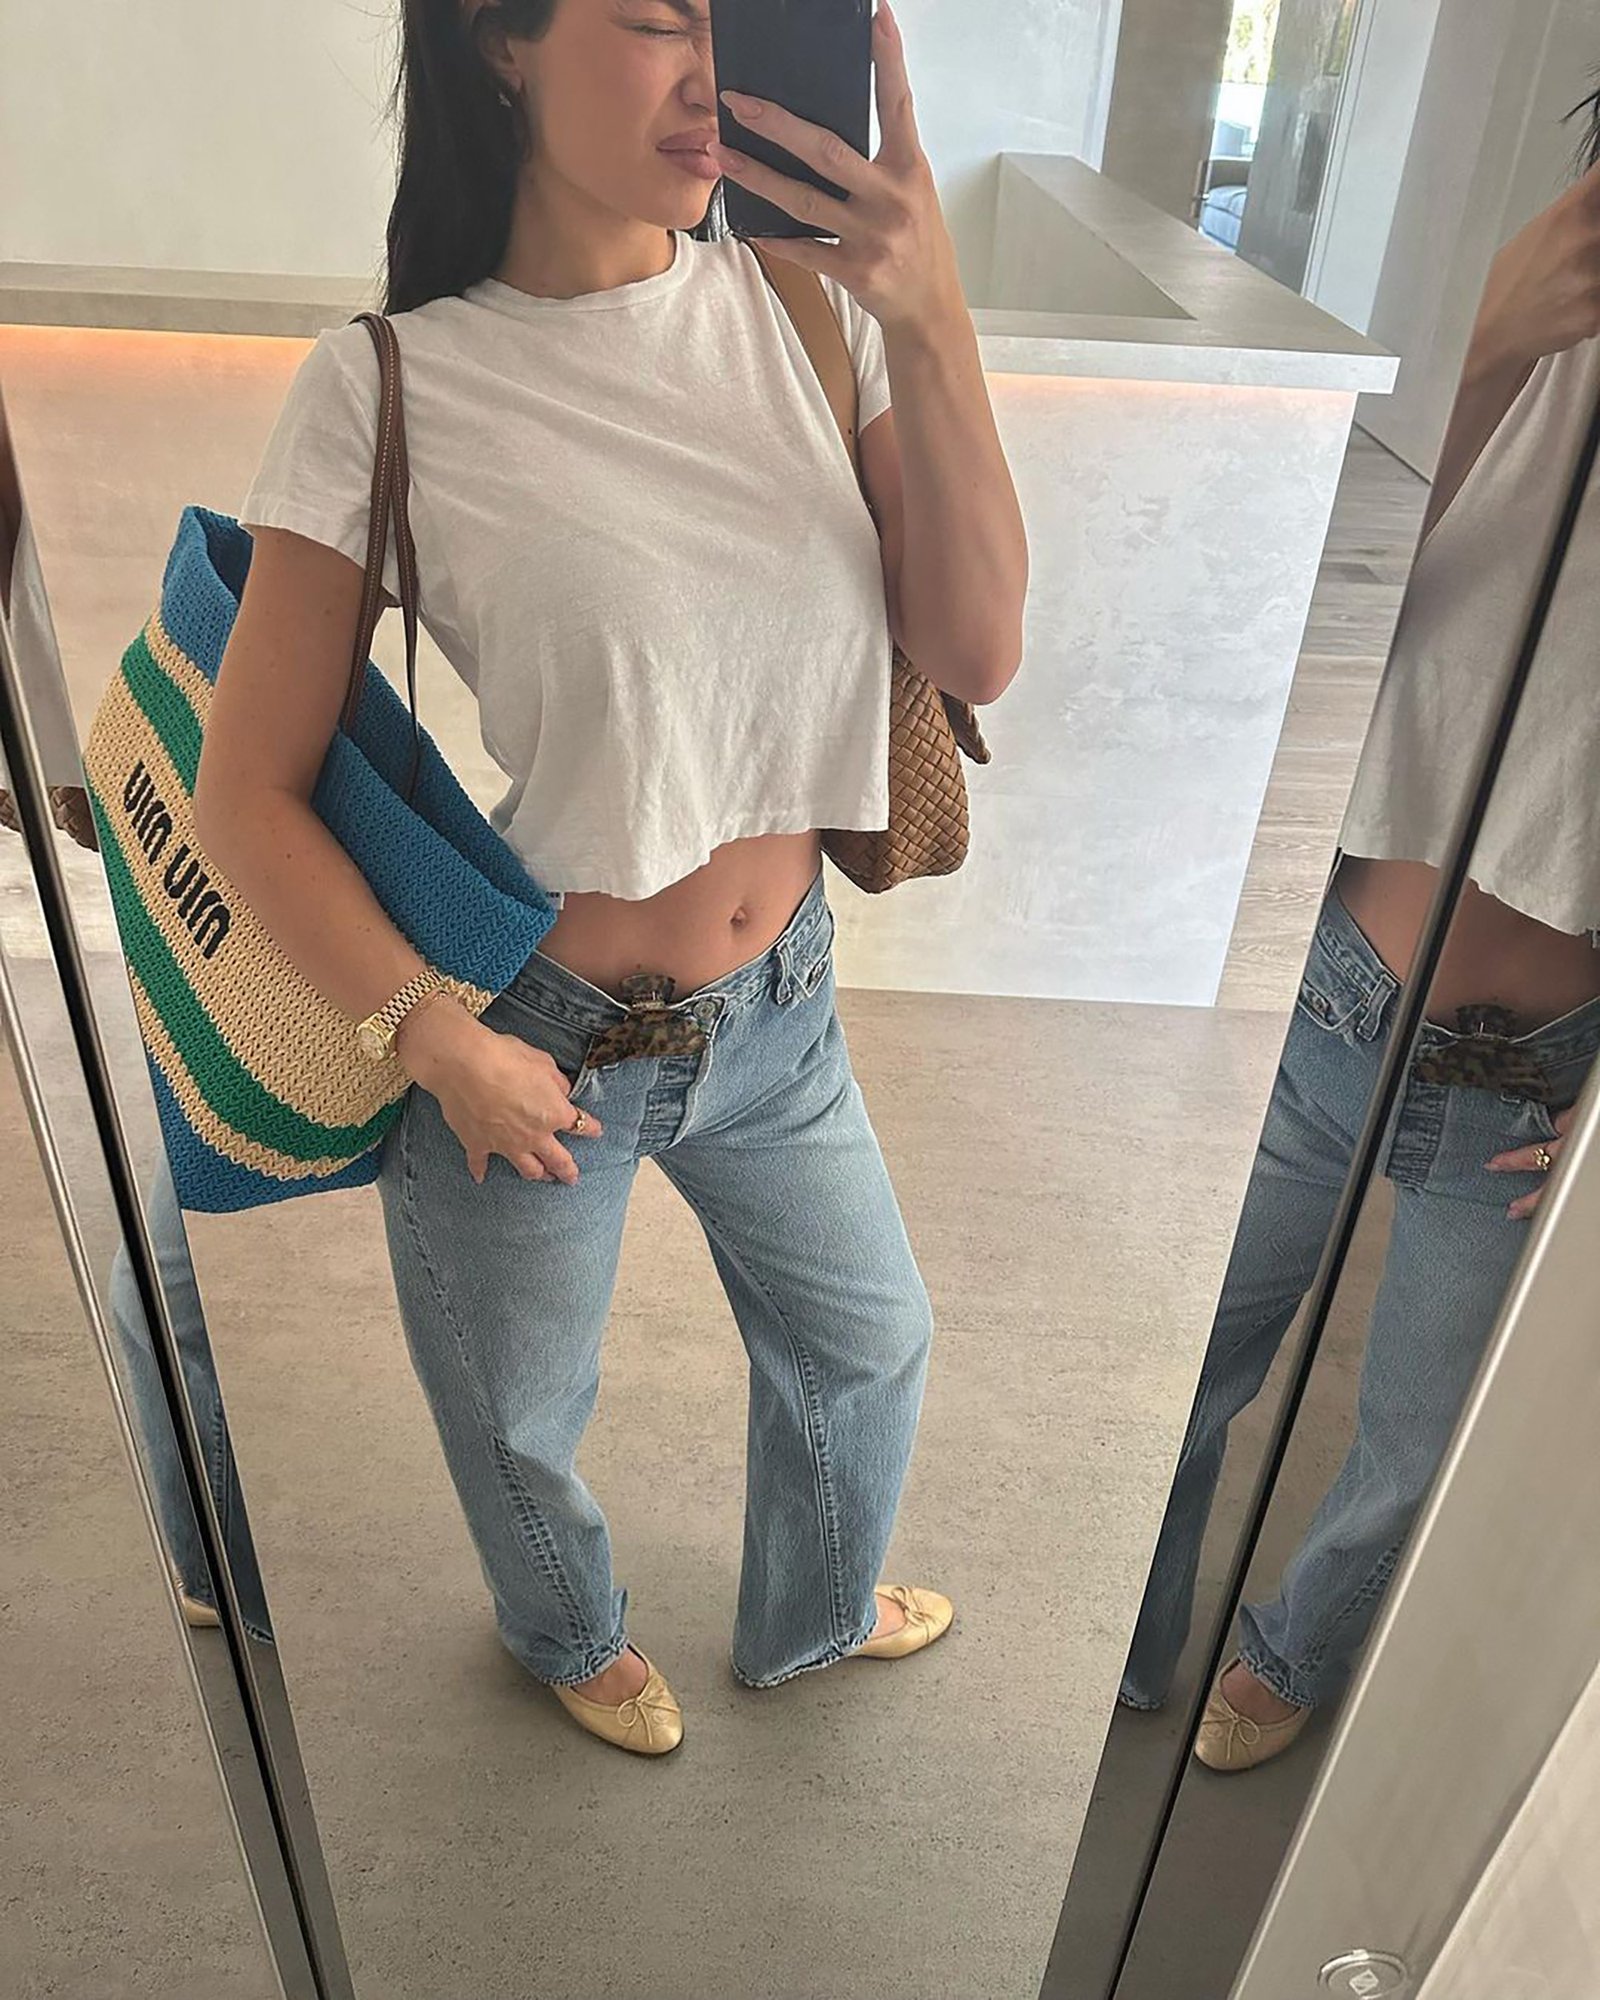 A mirror selfie of Kylie Jenner in a white T-shirt and jeans.